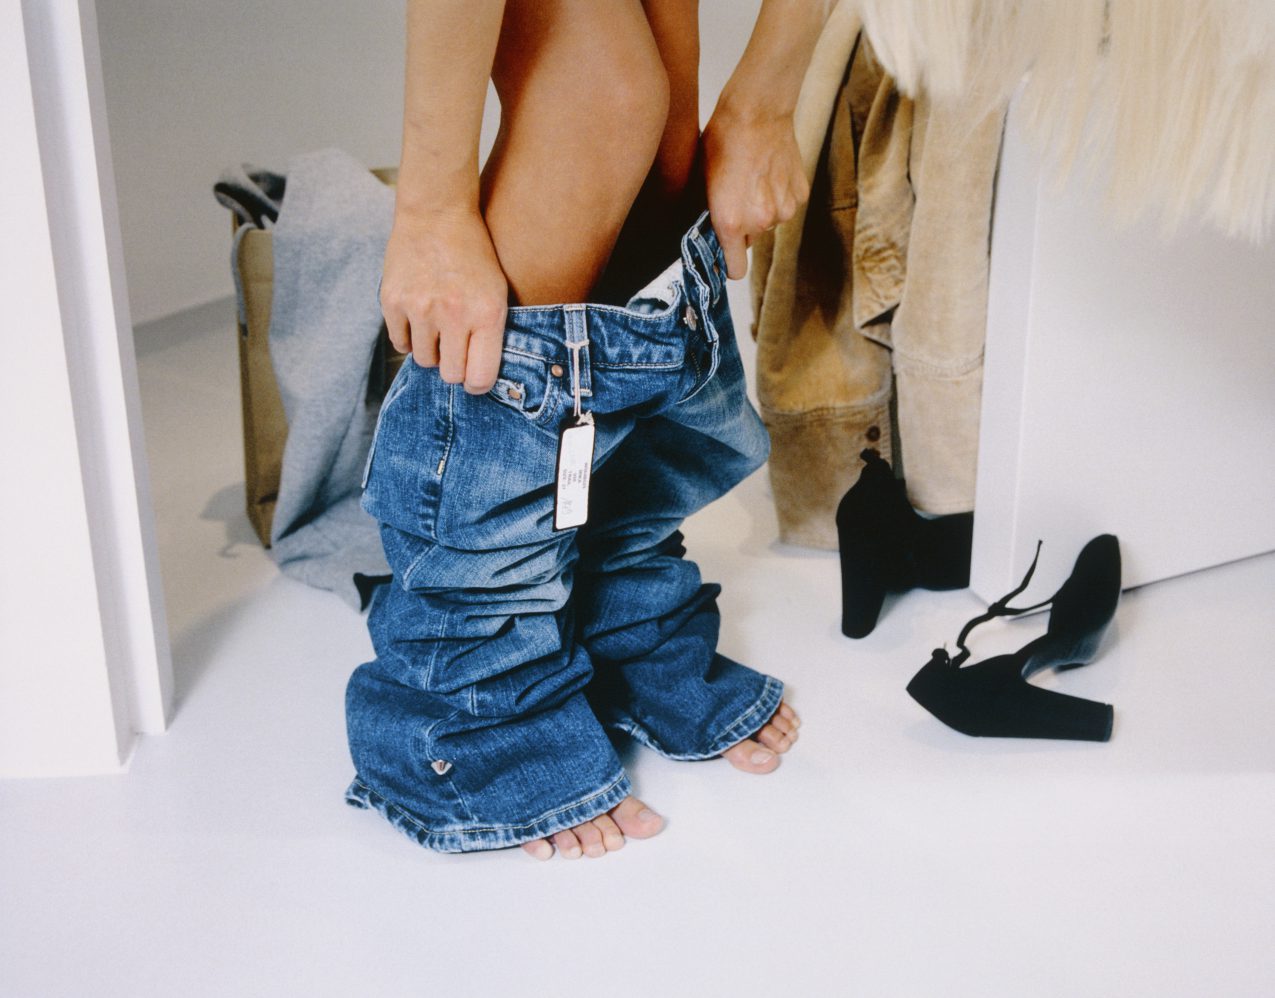 Woman Trying On Jeans